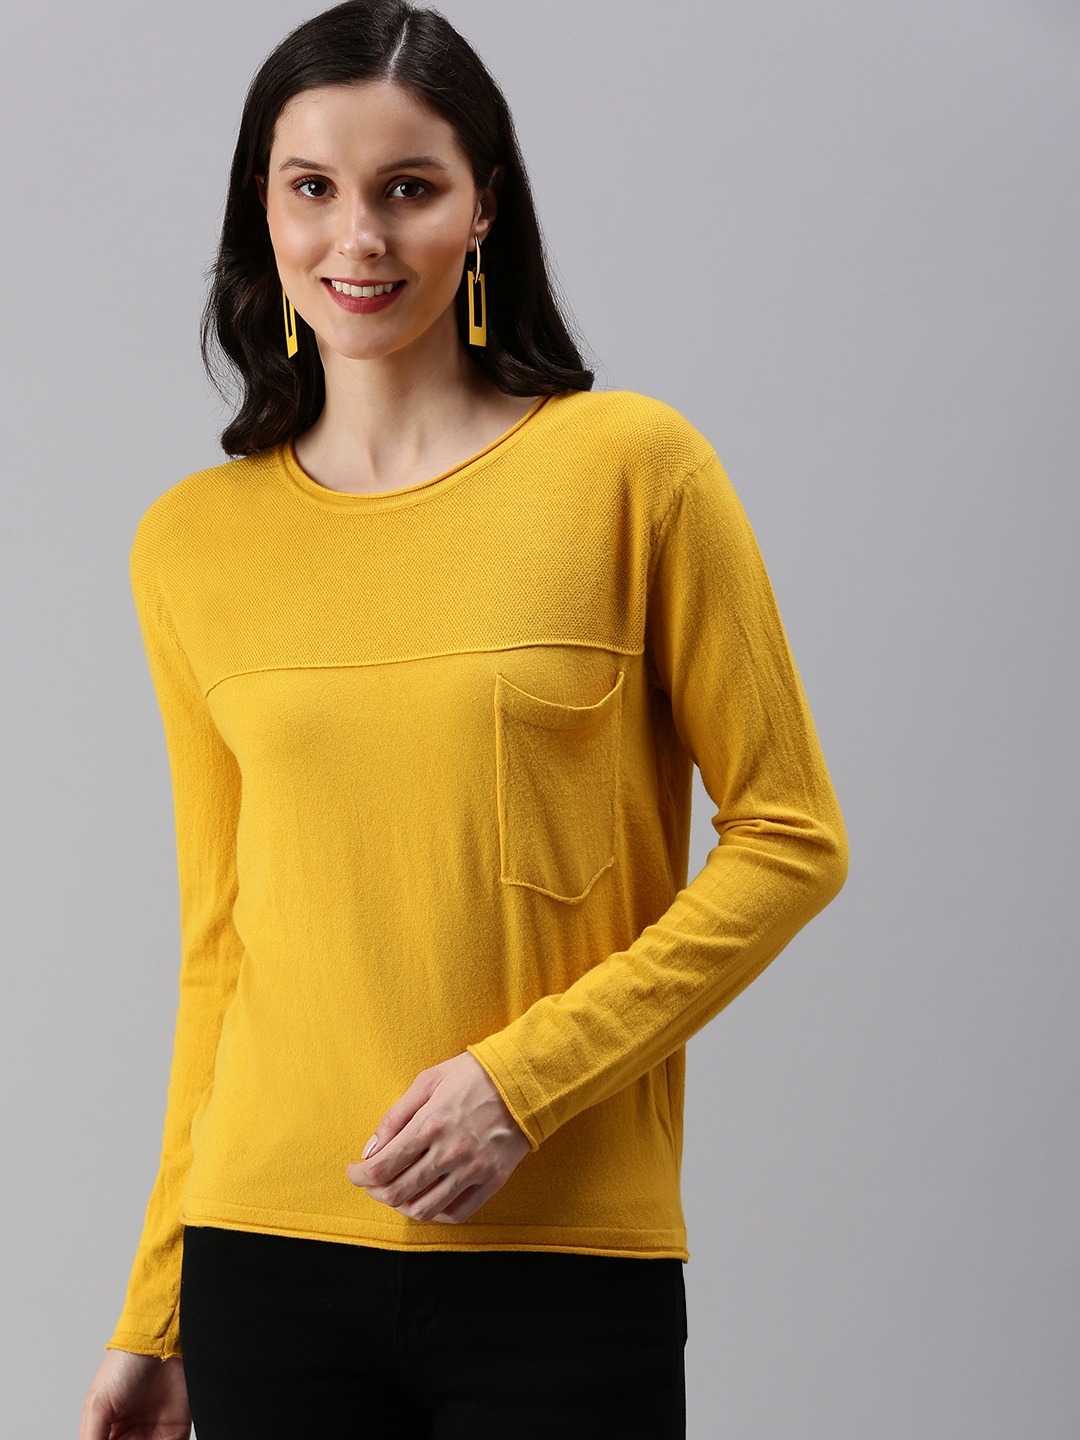 SHOWOFF Women's Solid Fitted Yellow Round Neck Top